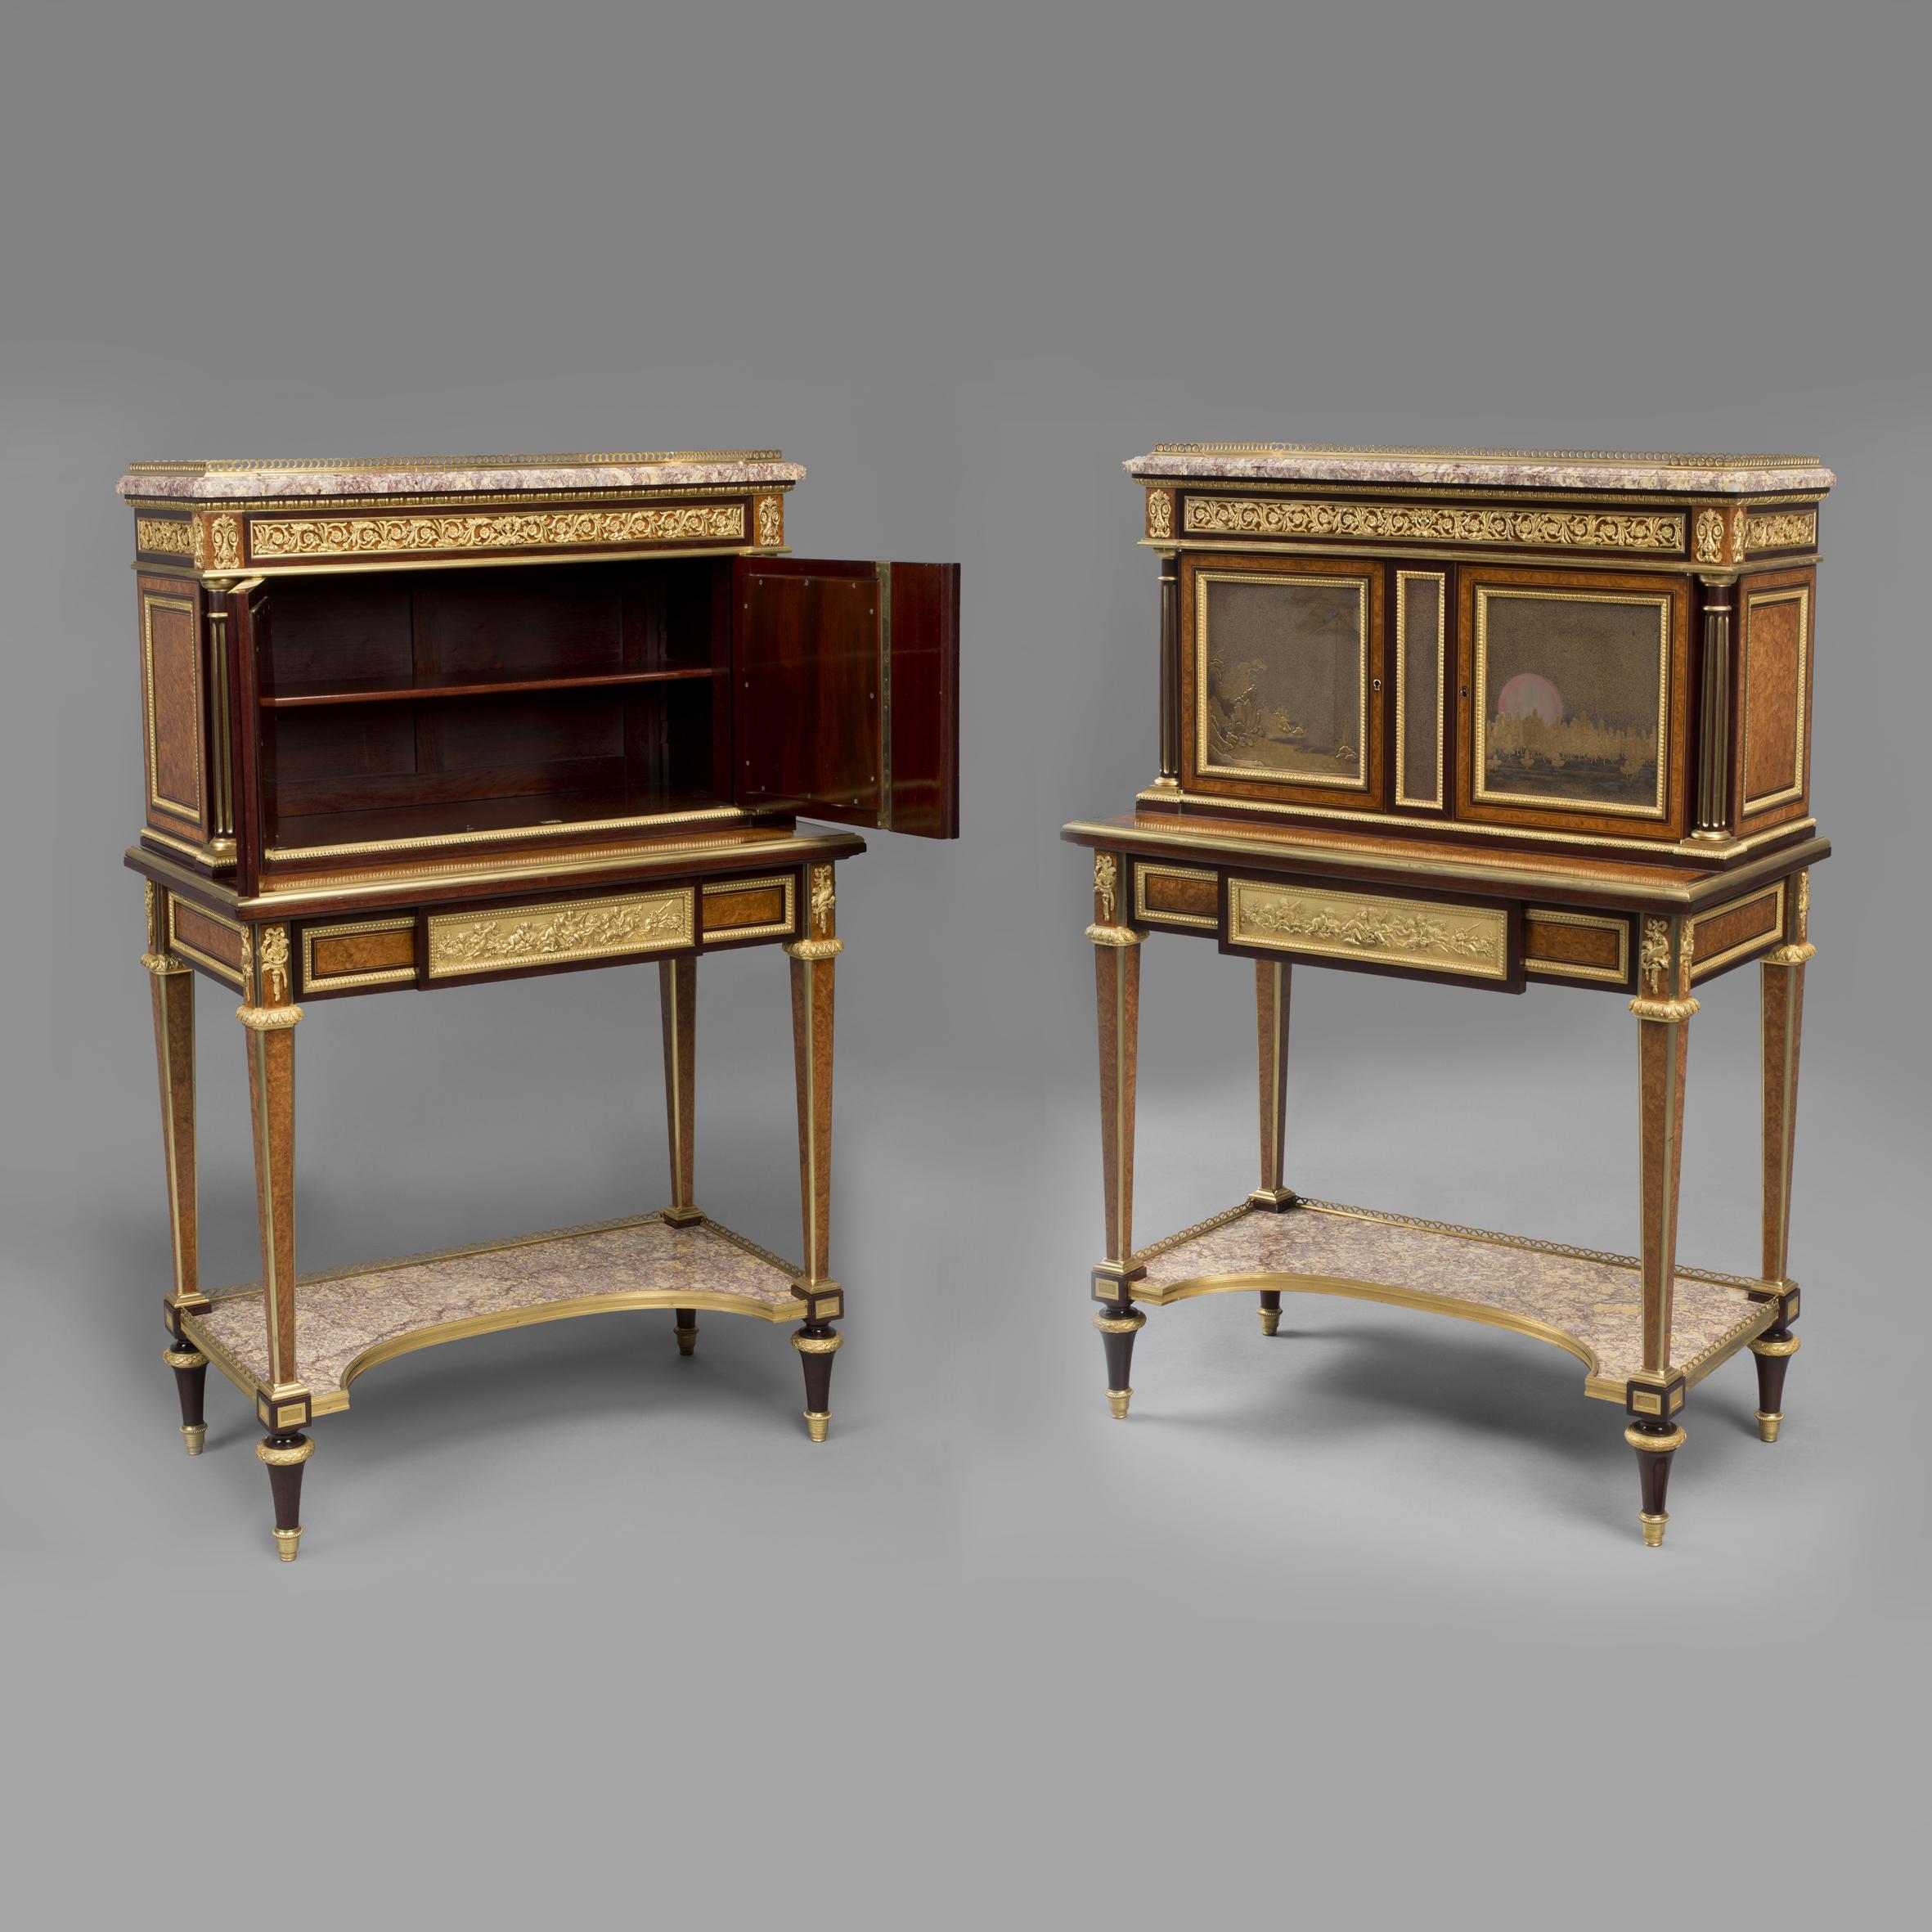 Louis XVI Pair of Bonheur Du Jours With Lacquer Panels, by Henry Dasson For Sale